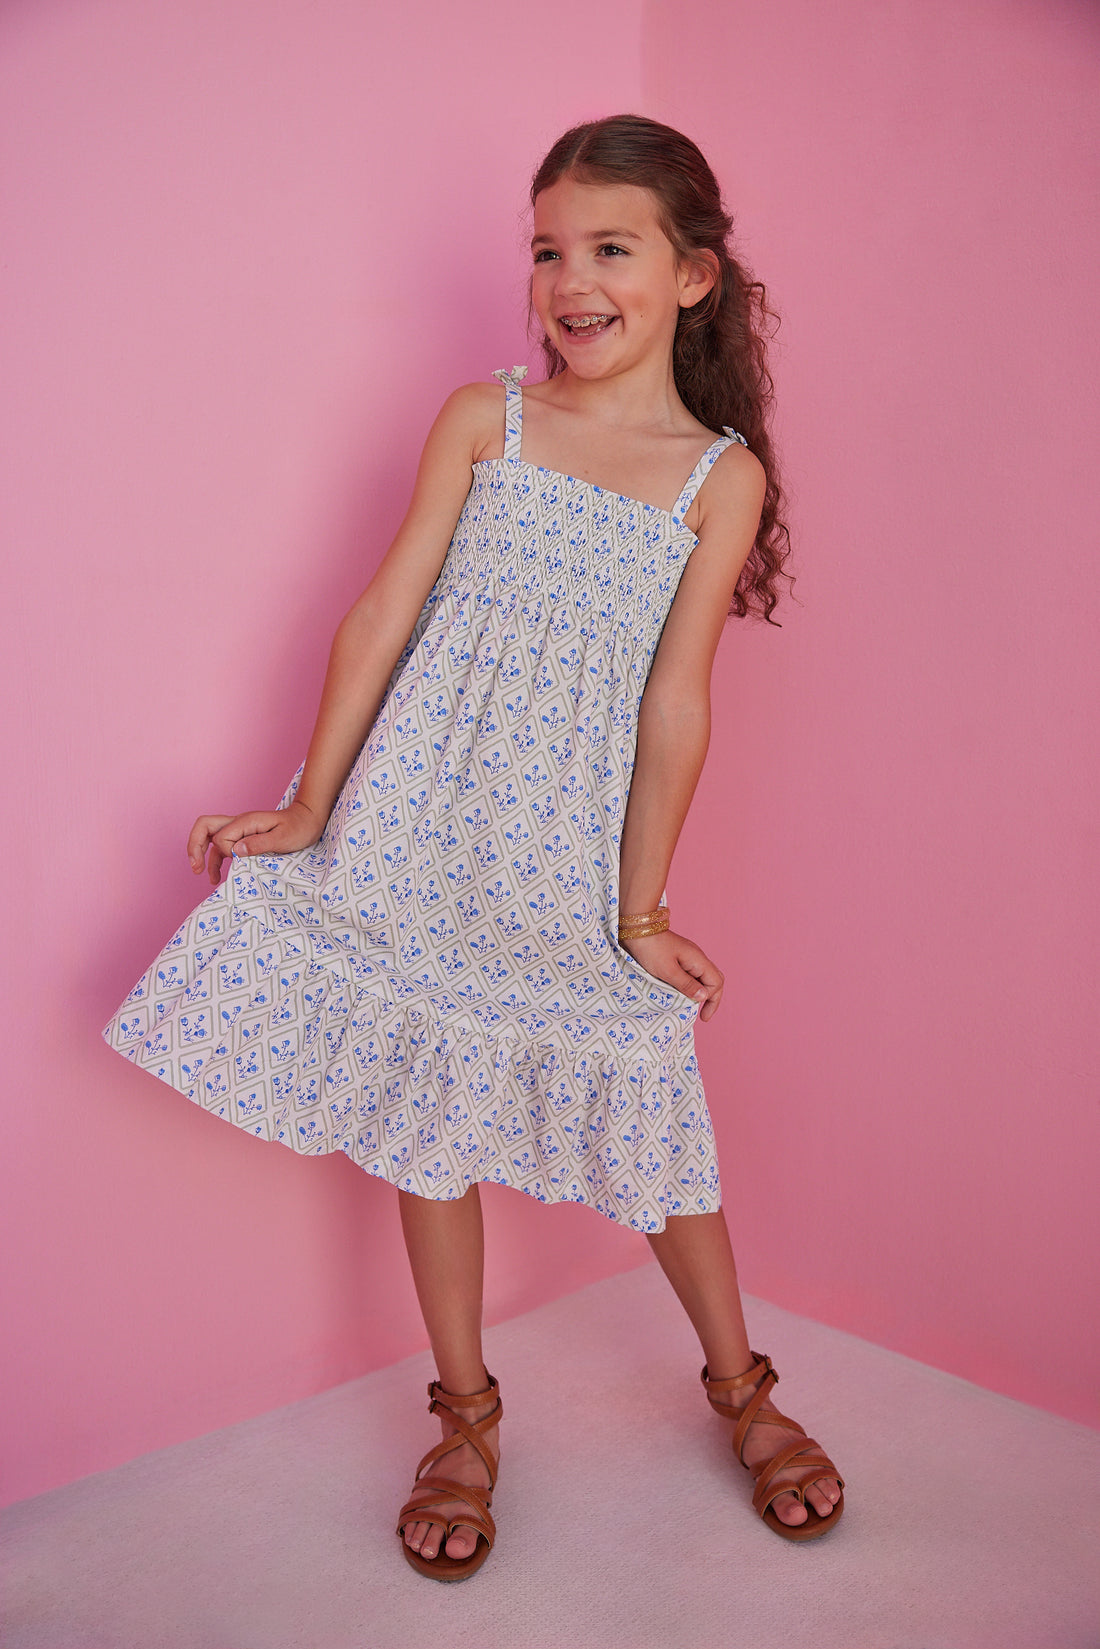 BISBY girl seen in our Lucy Dress in Vintage Azur which features a gorgeous yet simple blue and green floral pattern. This dress has fixed ties on the straps for an elevated look and ruching across the bust for a comfortable yet fitted look.